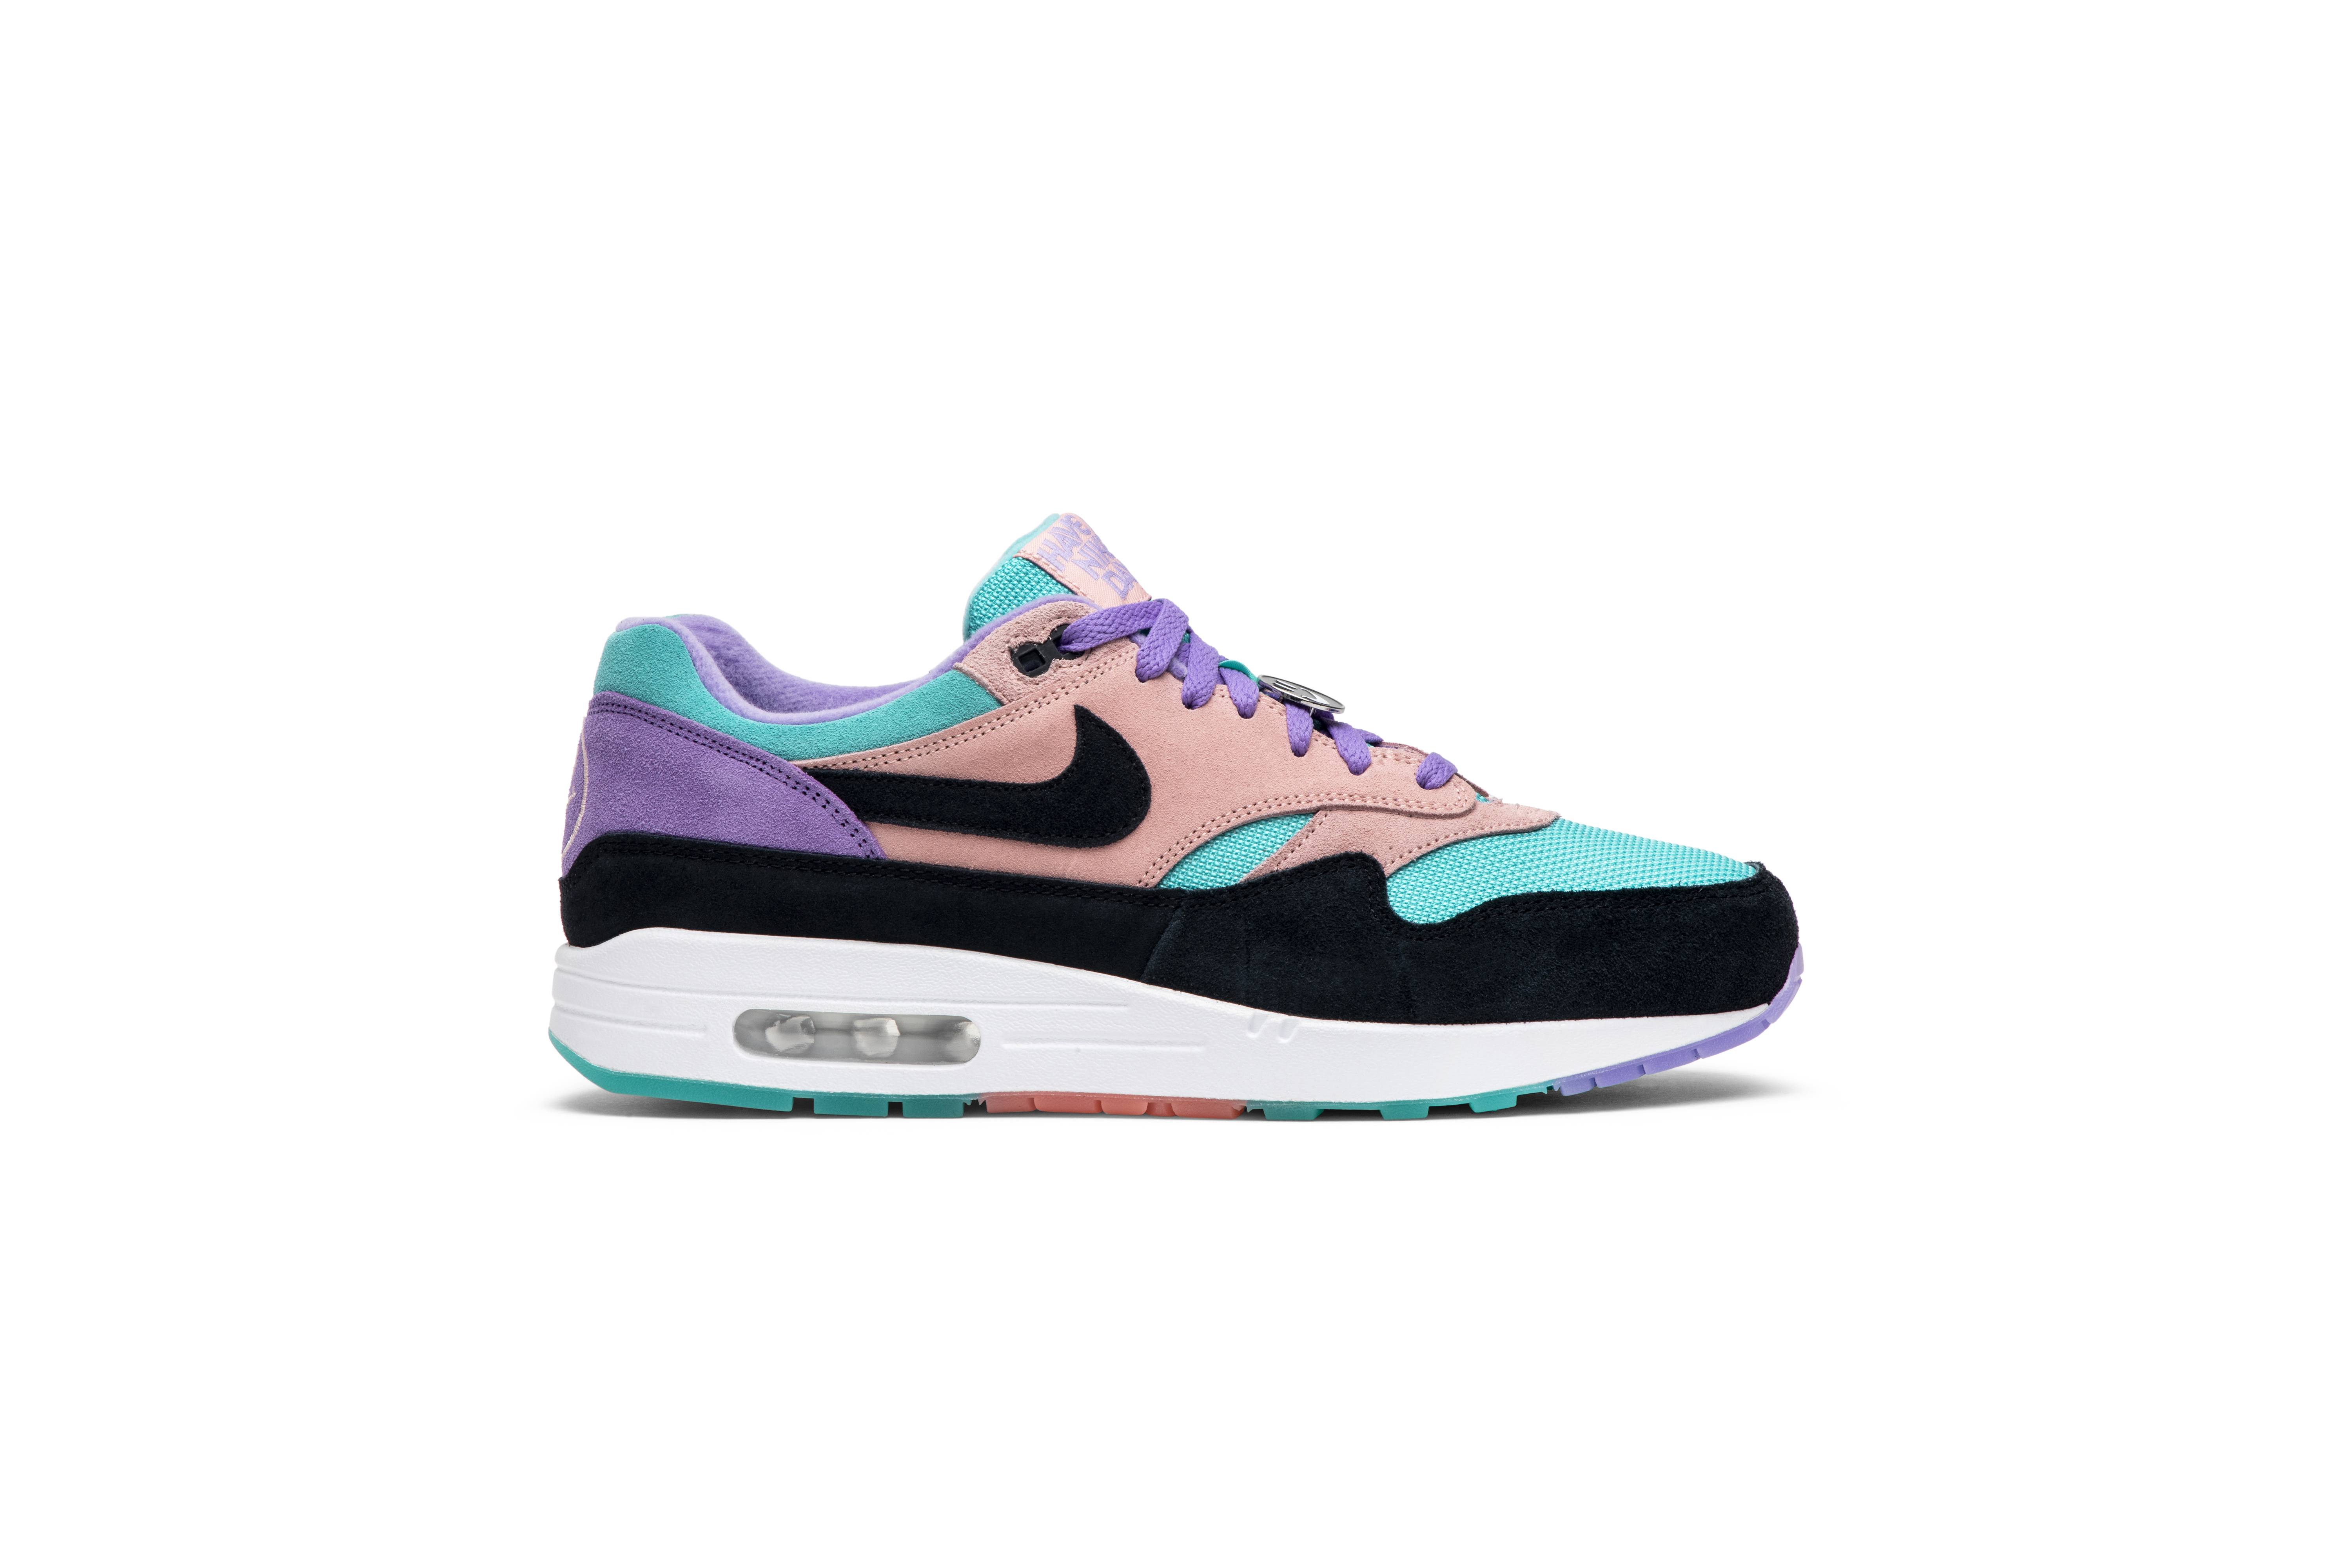 have a nike day am1